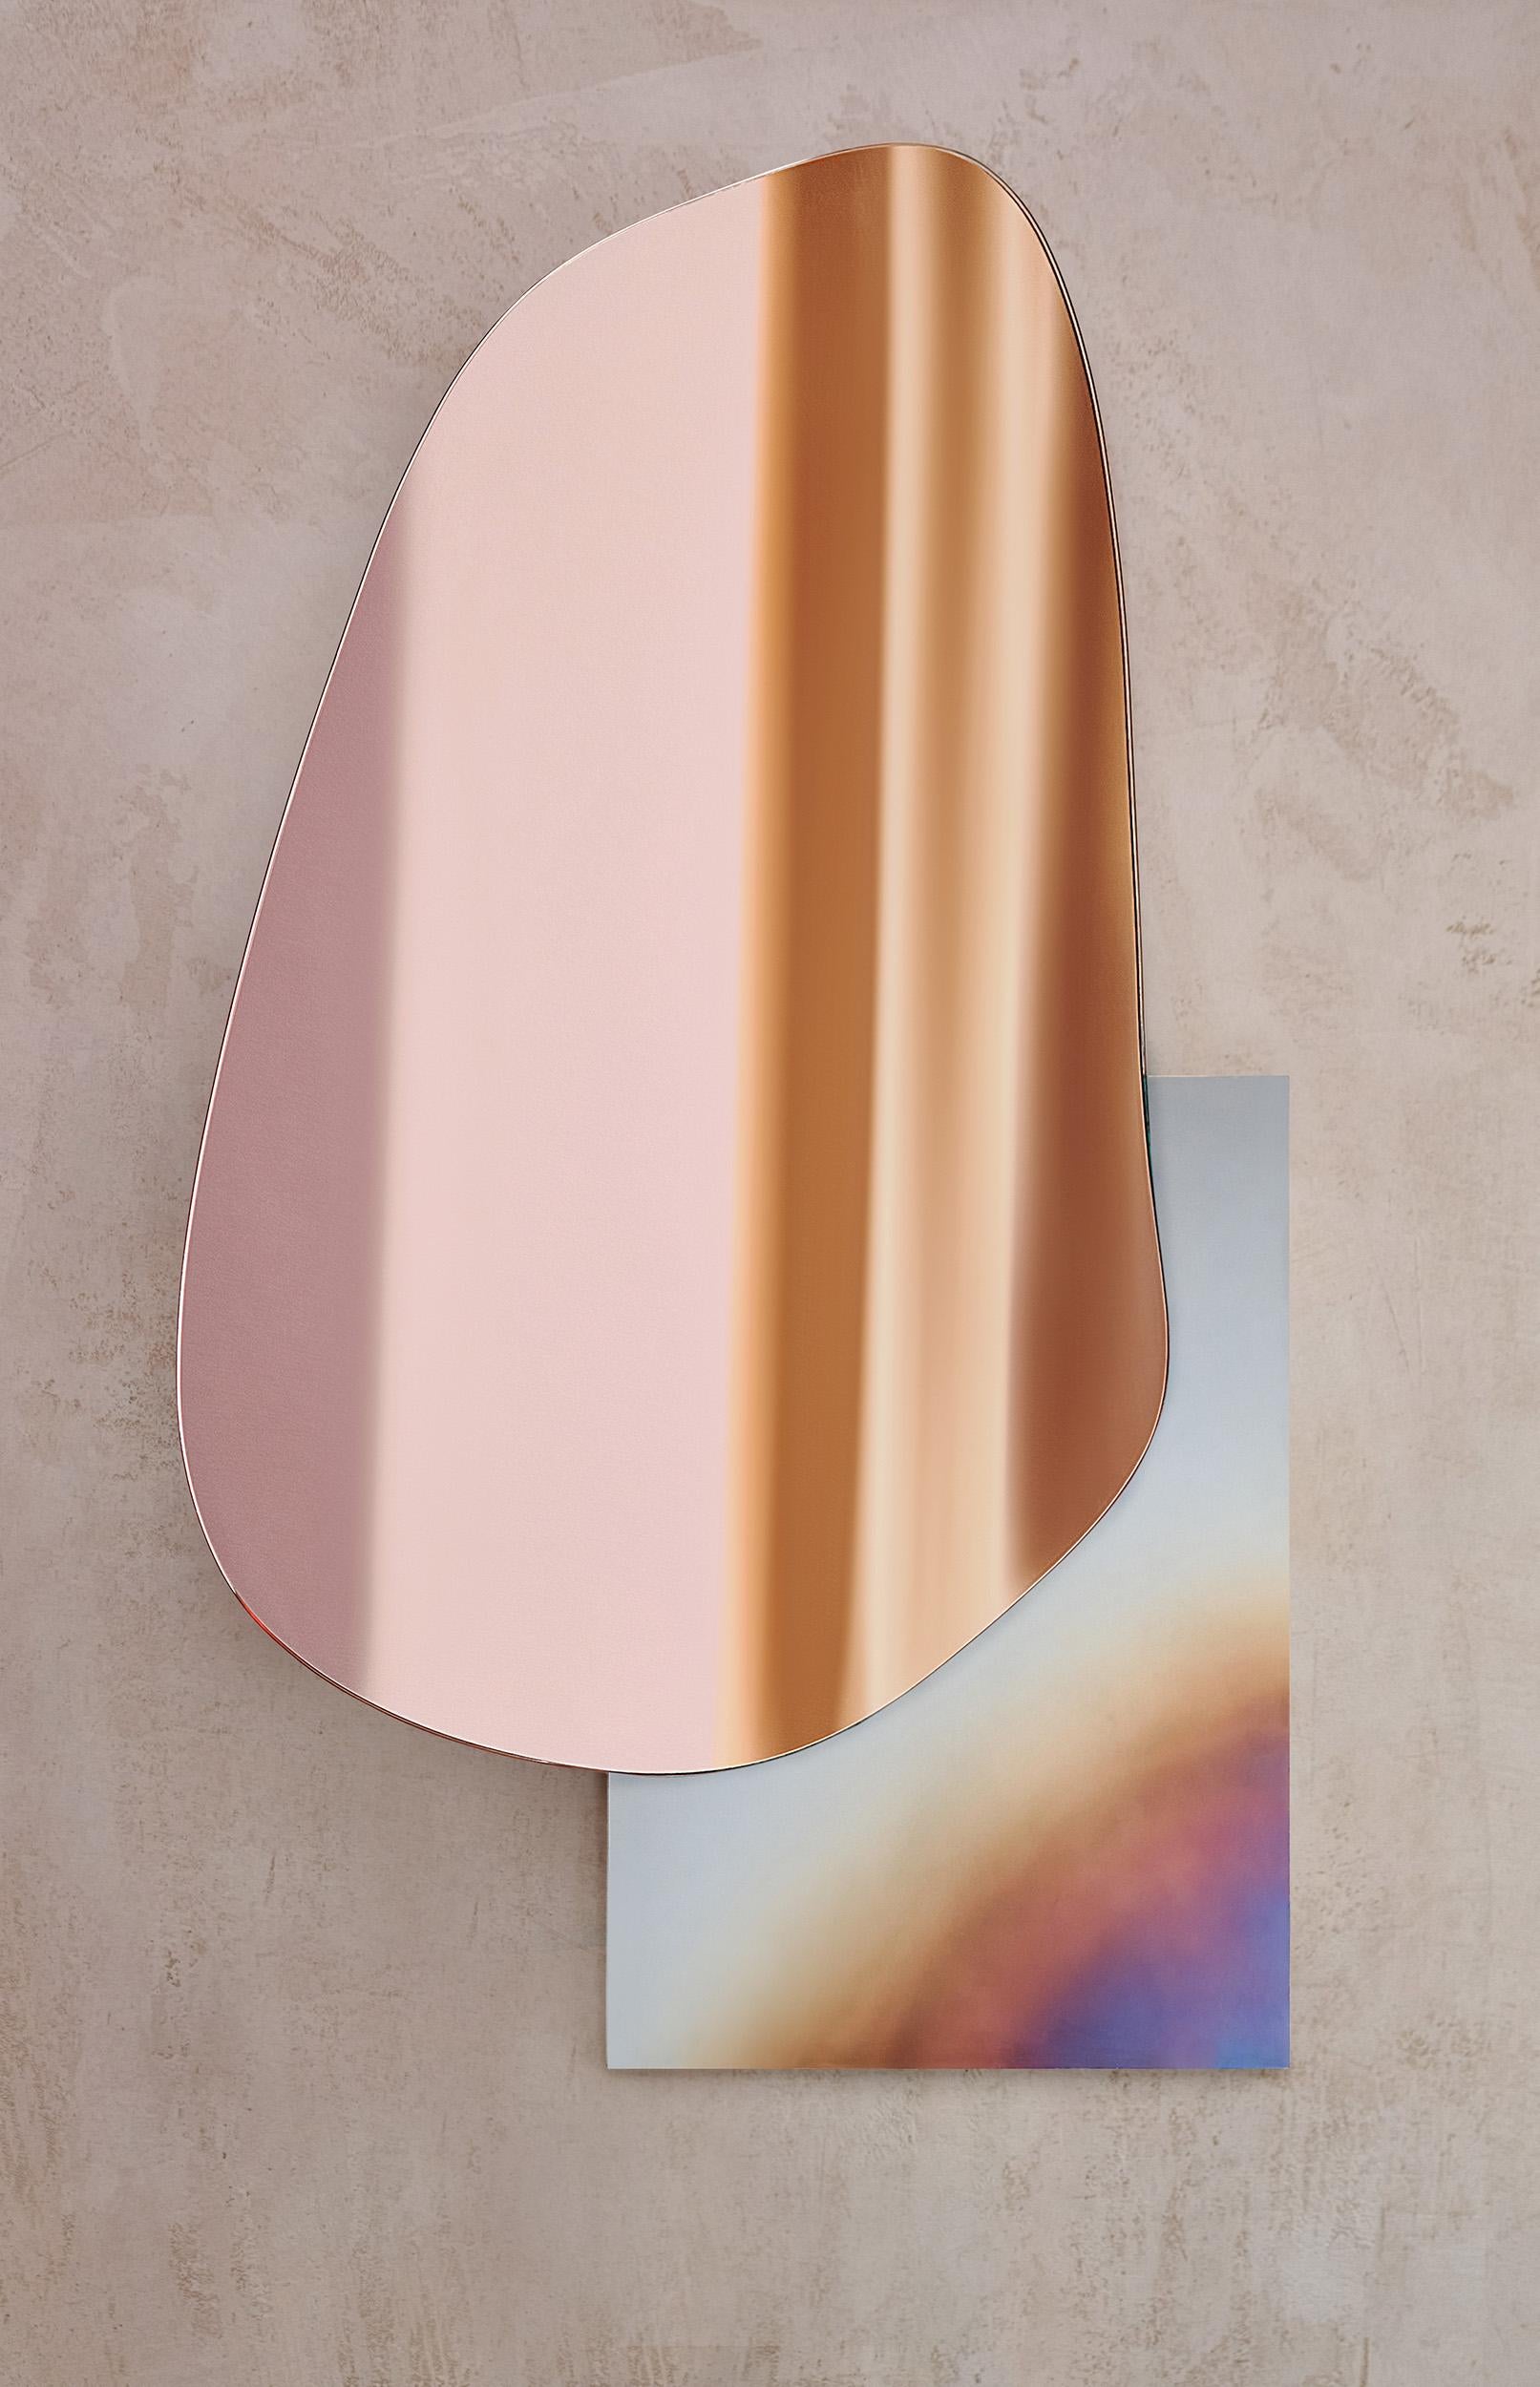 Modern Wall Mirror Lake 3 by Noom with White Marble Statuario Base and Copper Tint